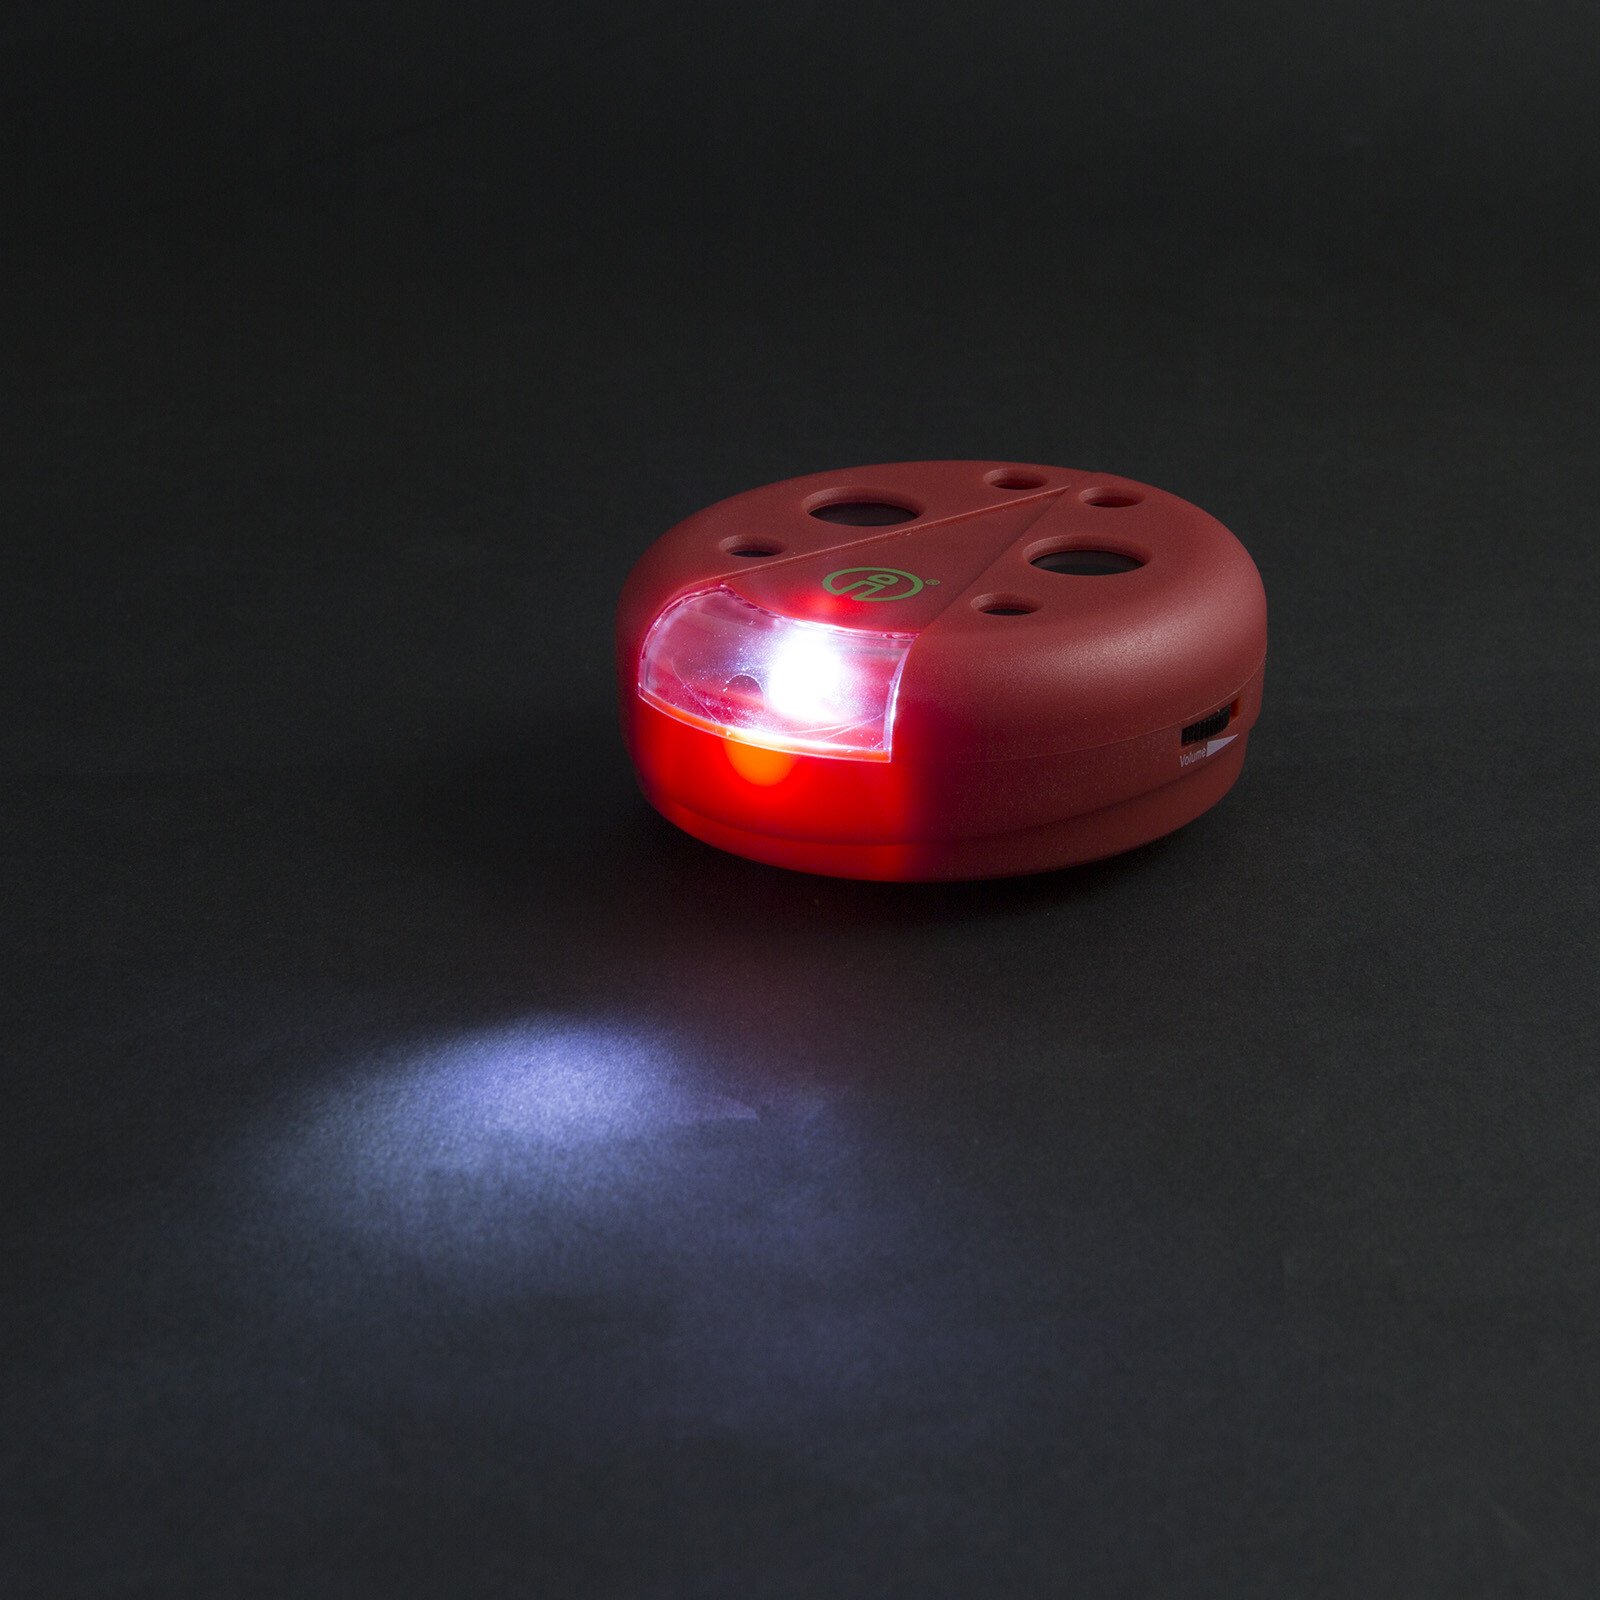 Mice, rats repellent with LED lamp thumb